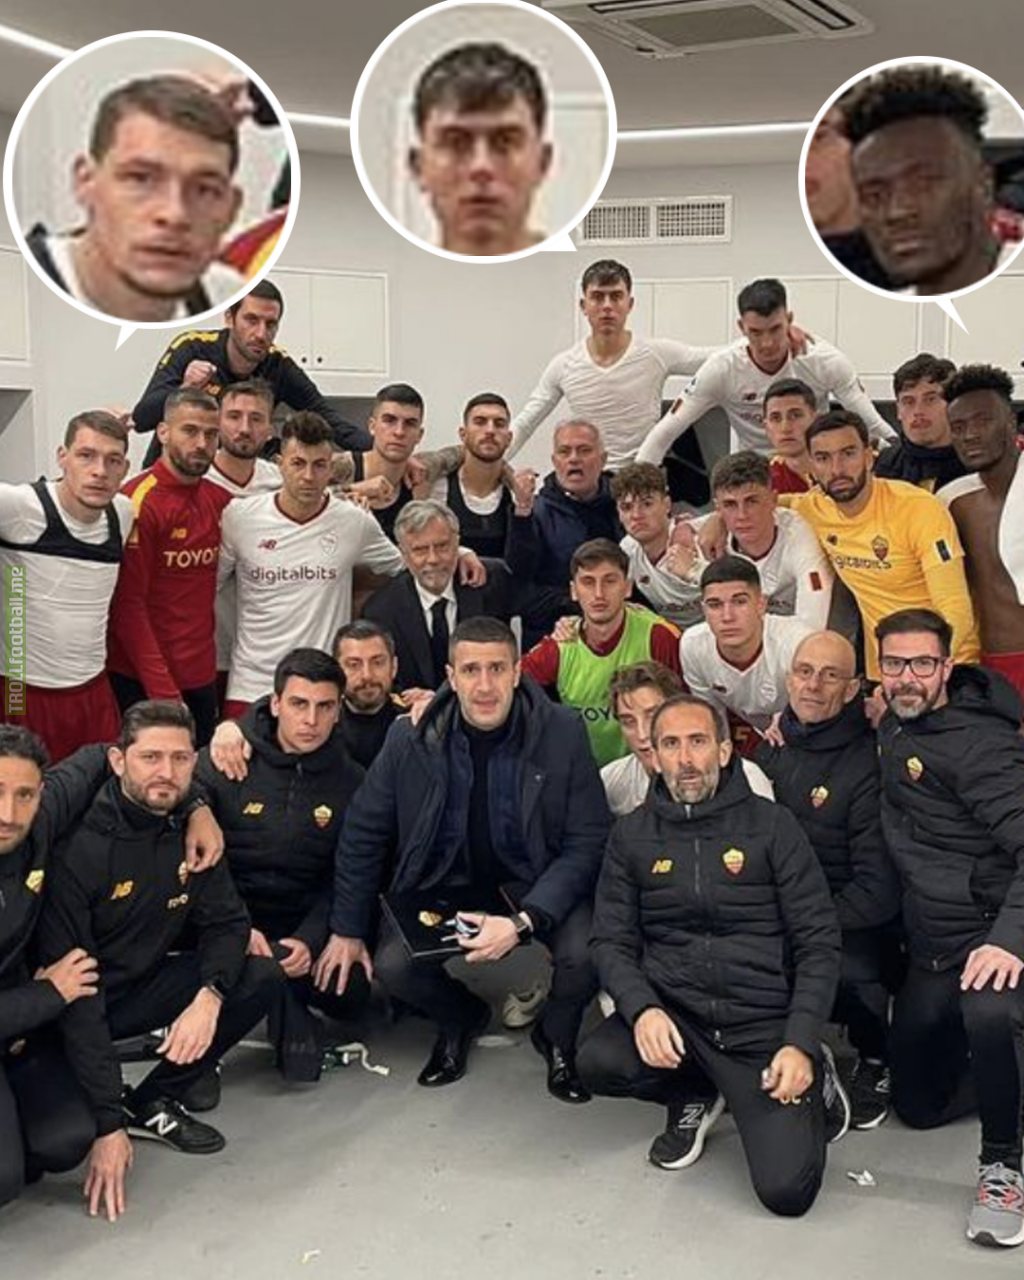 Jose Mourinho made his Roma players take a team photo after they lost to Napoli yesterday